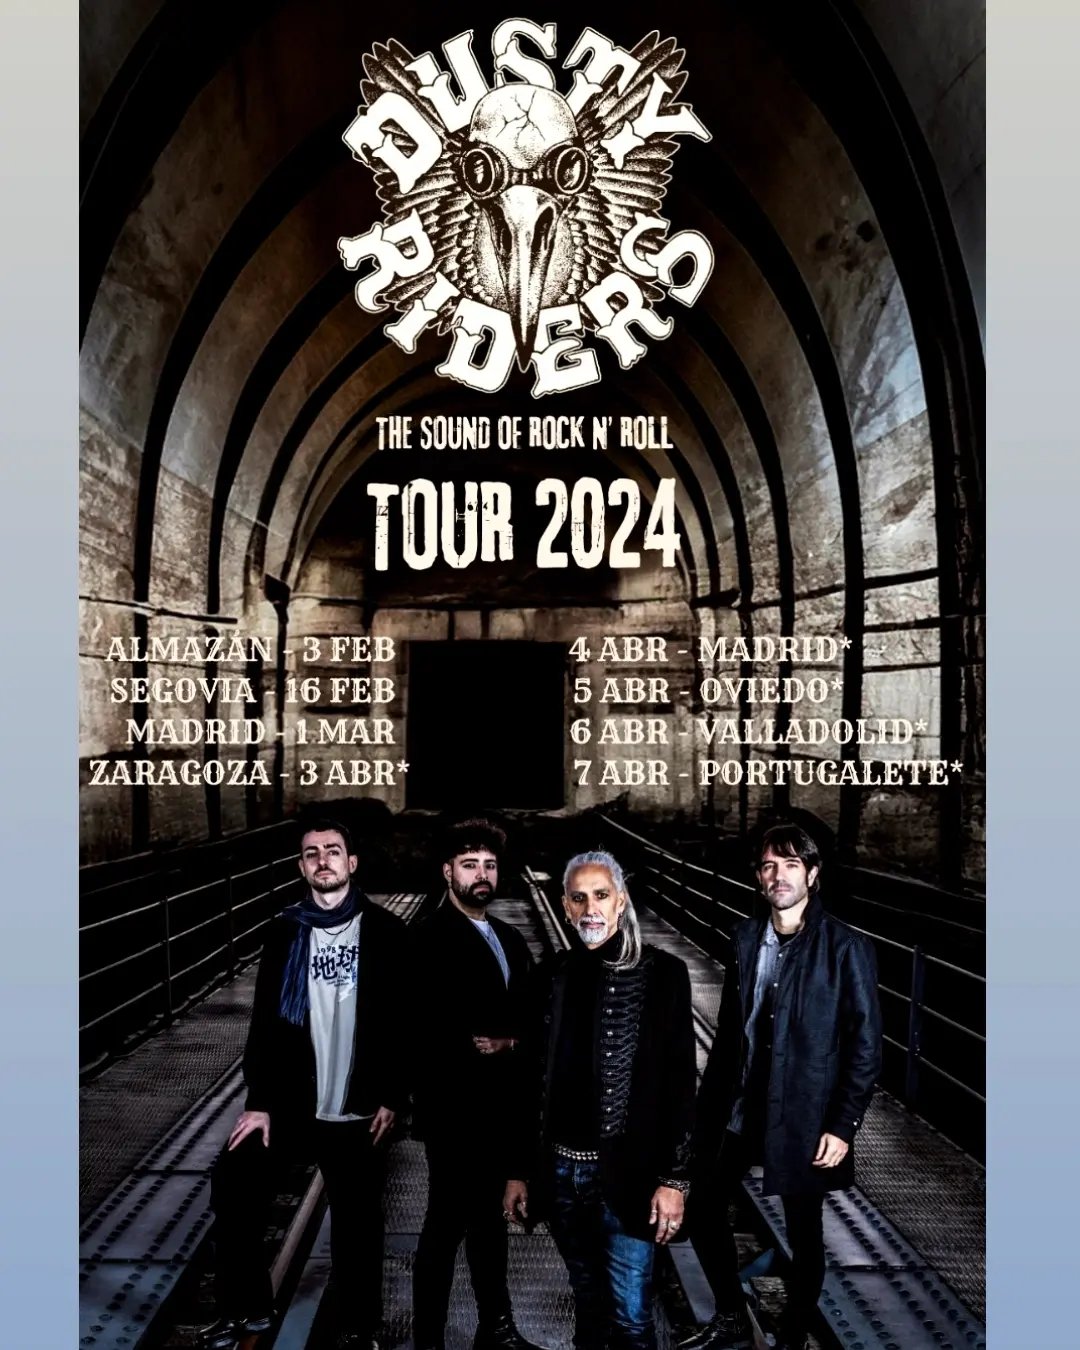 Dusty Riders "The Sound Of Rock And Roll Gira 2024"